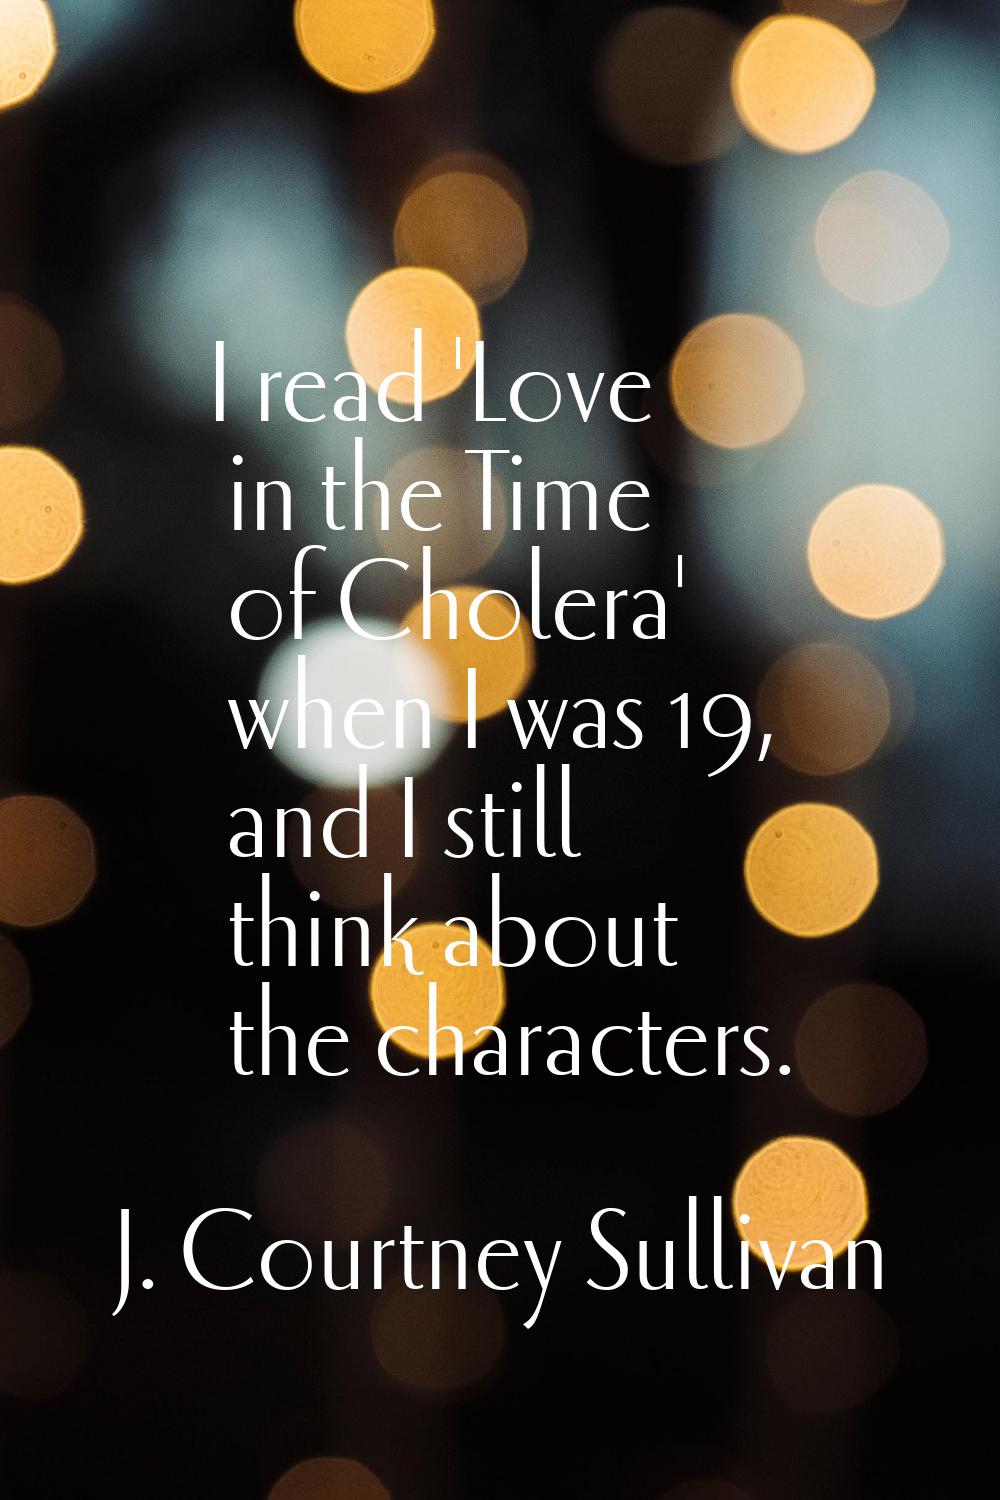 I read 'Love in the Time of Cholera' when I was 19, and I still think about the characters.